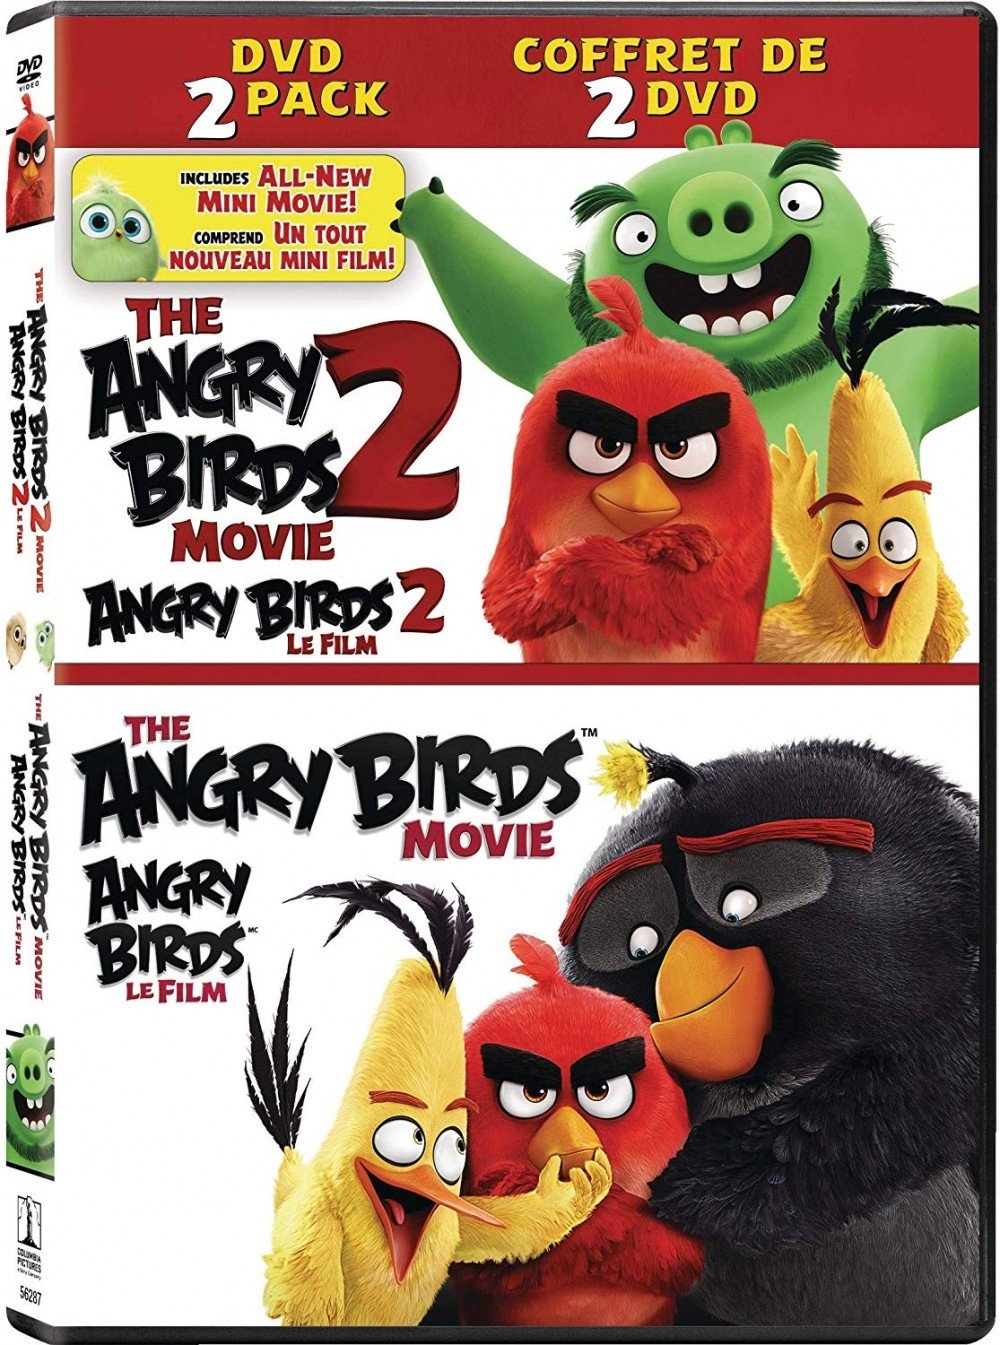 Angry Birds 1 Filmul + Angry Birds 2 Filmul (Colectie 2 DVD-uri) / The Angry Birds 1+2 Movie Collection | Thurop Van Orman, John Rice image0